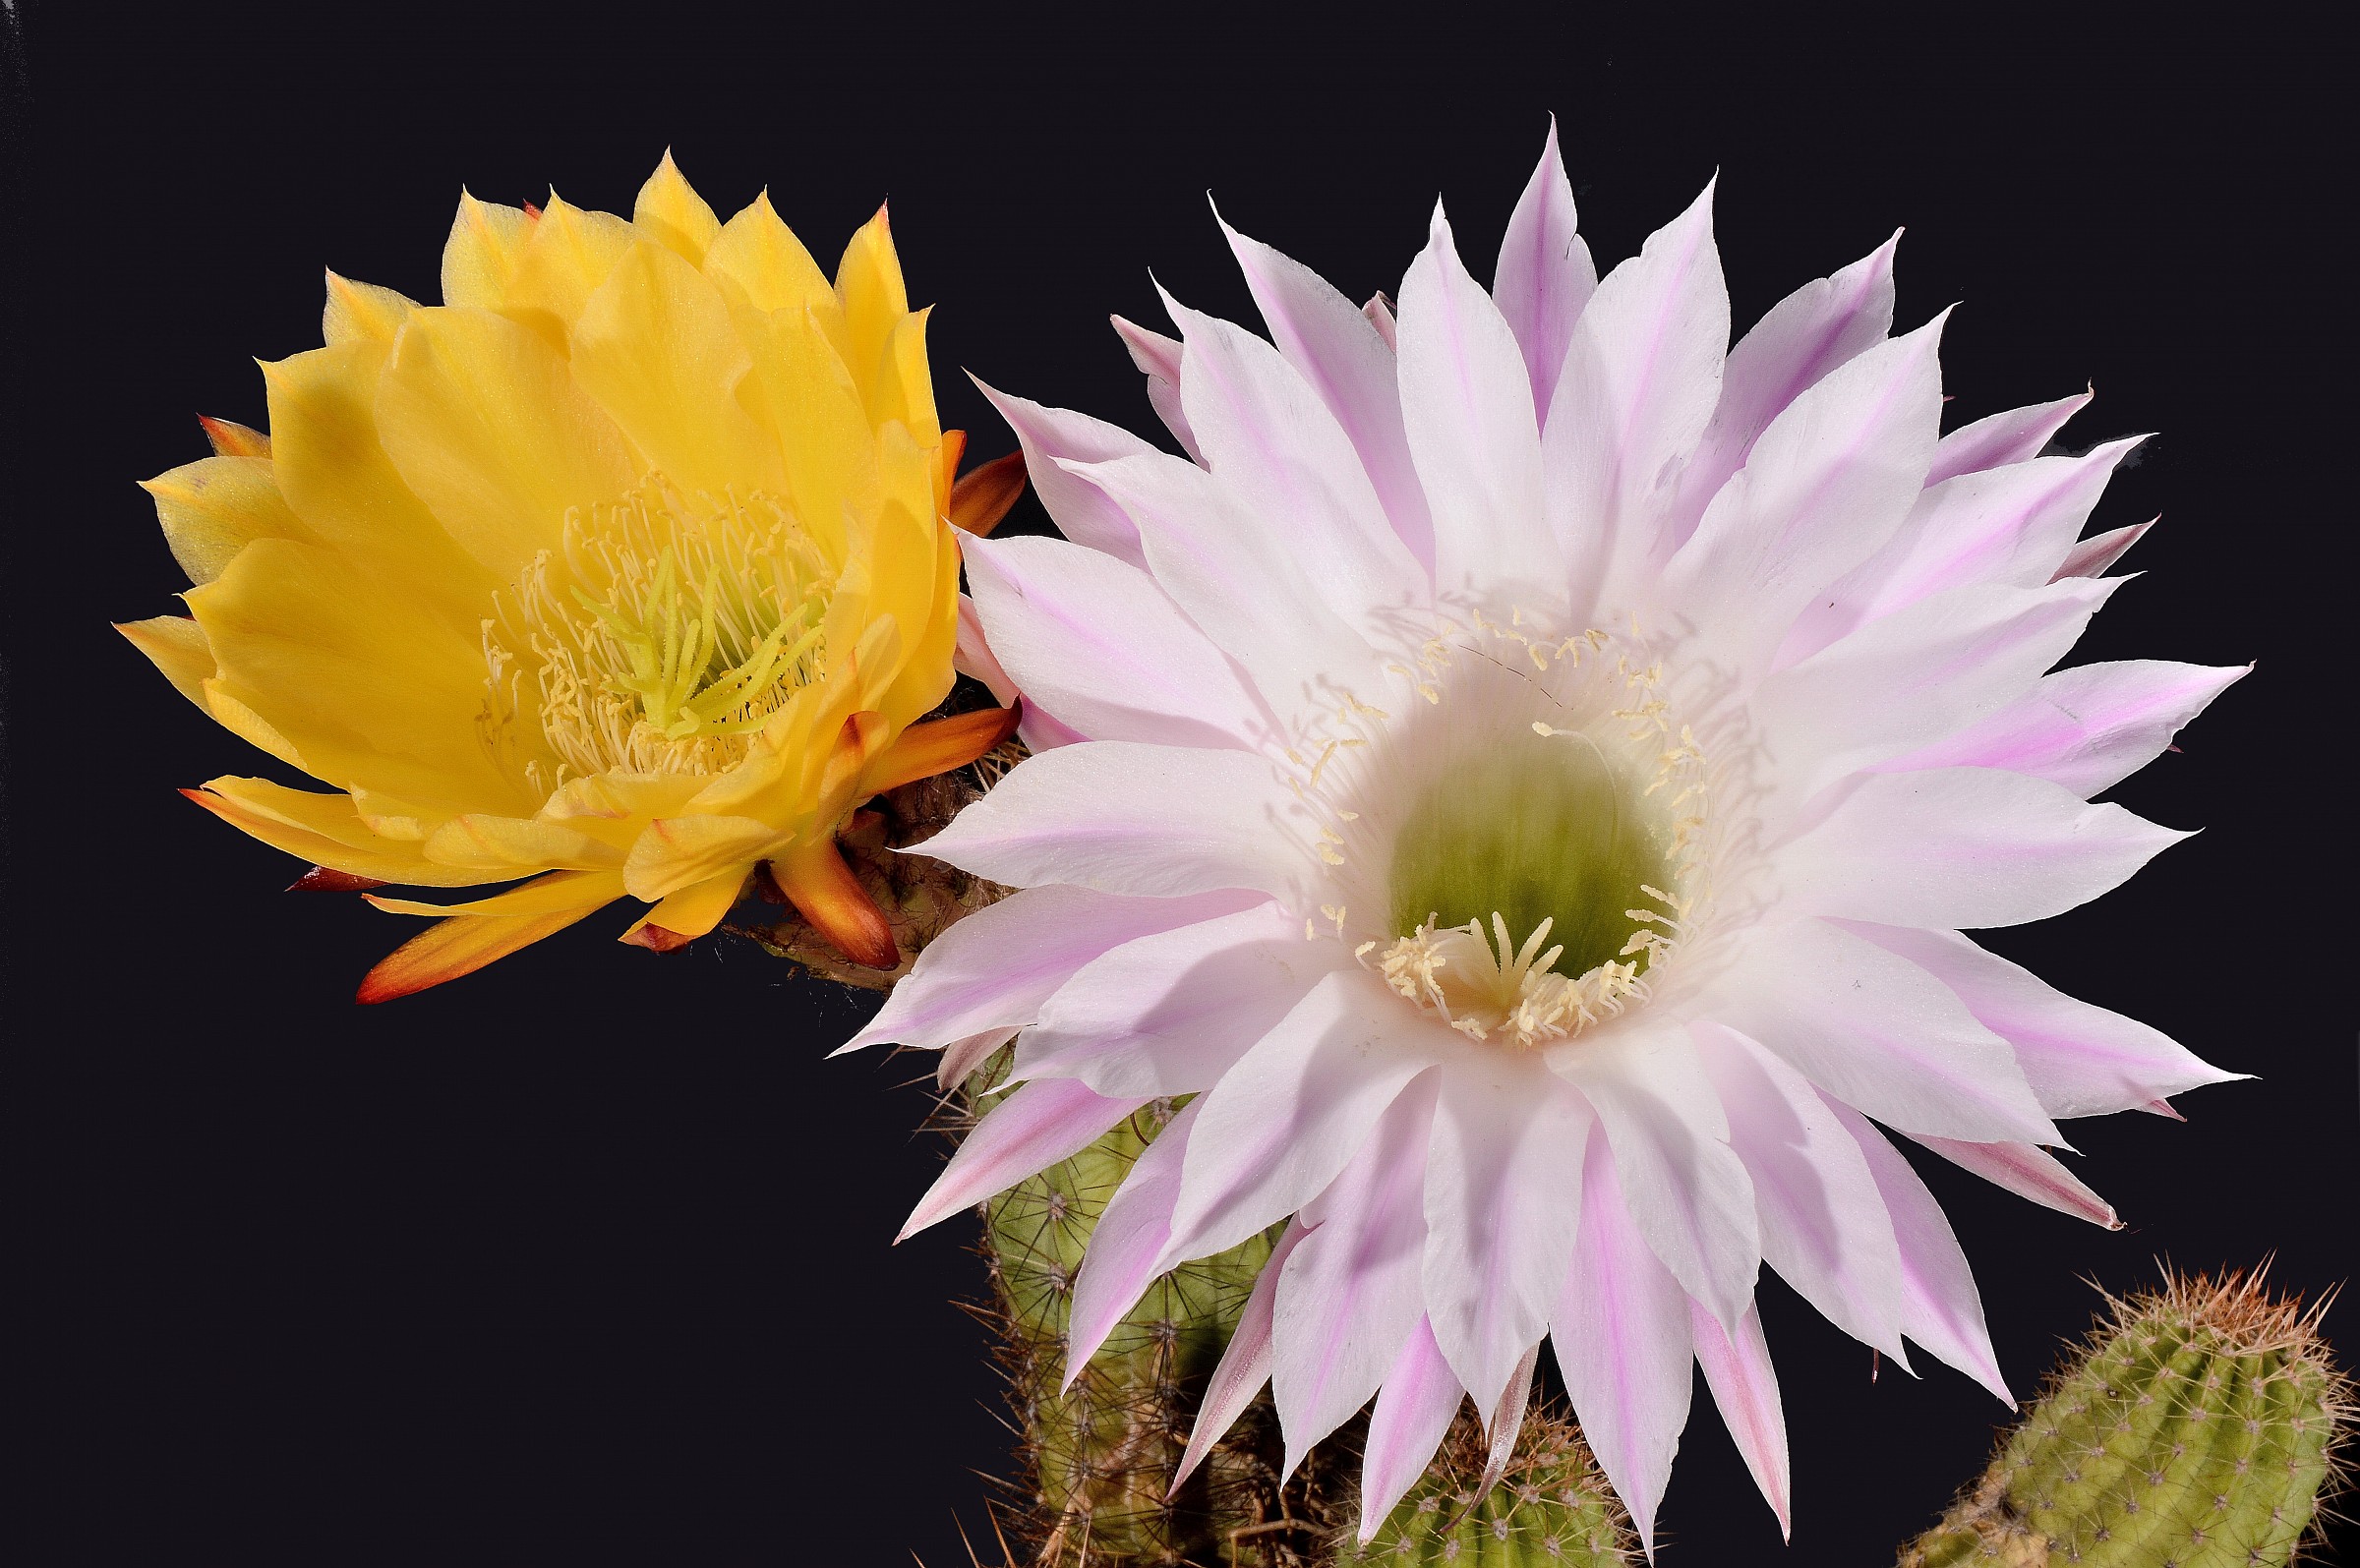 cactus flowers together...